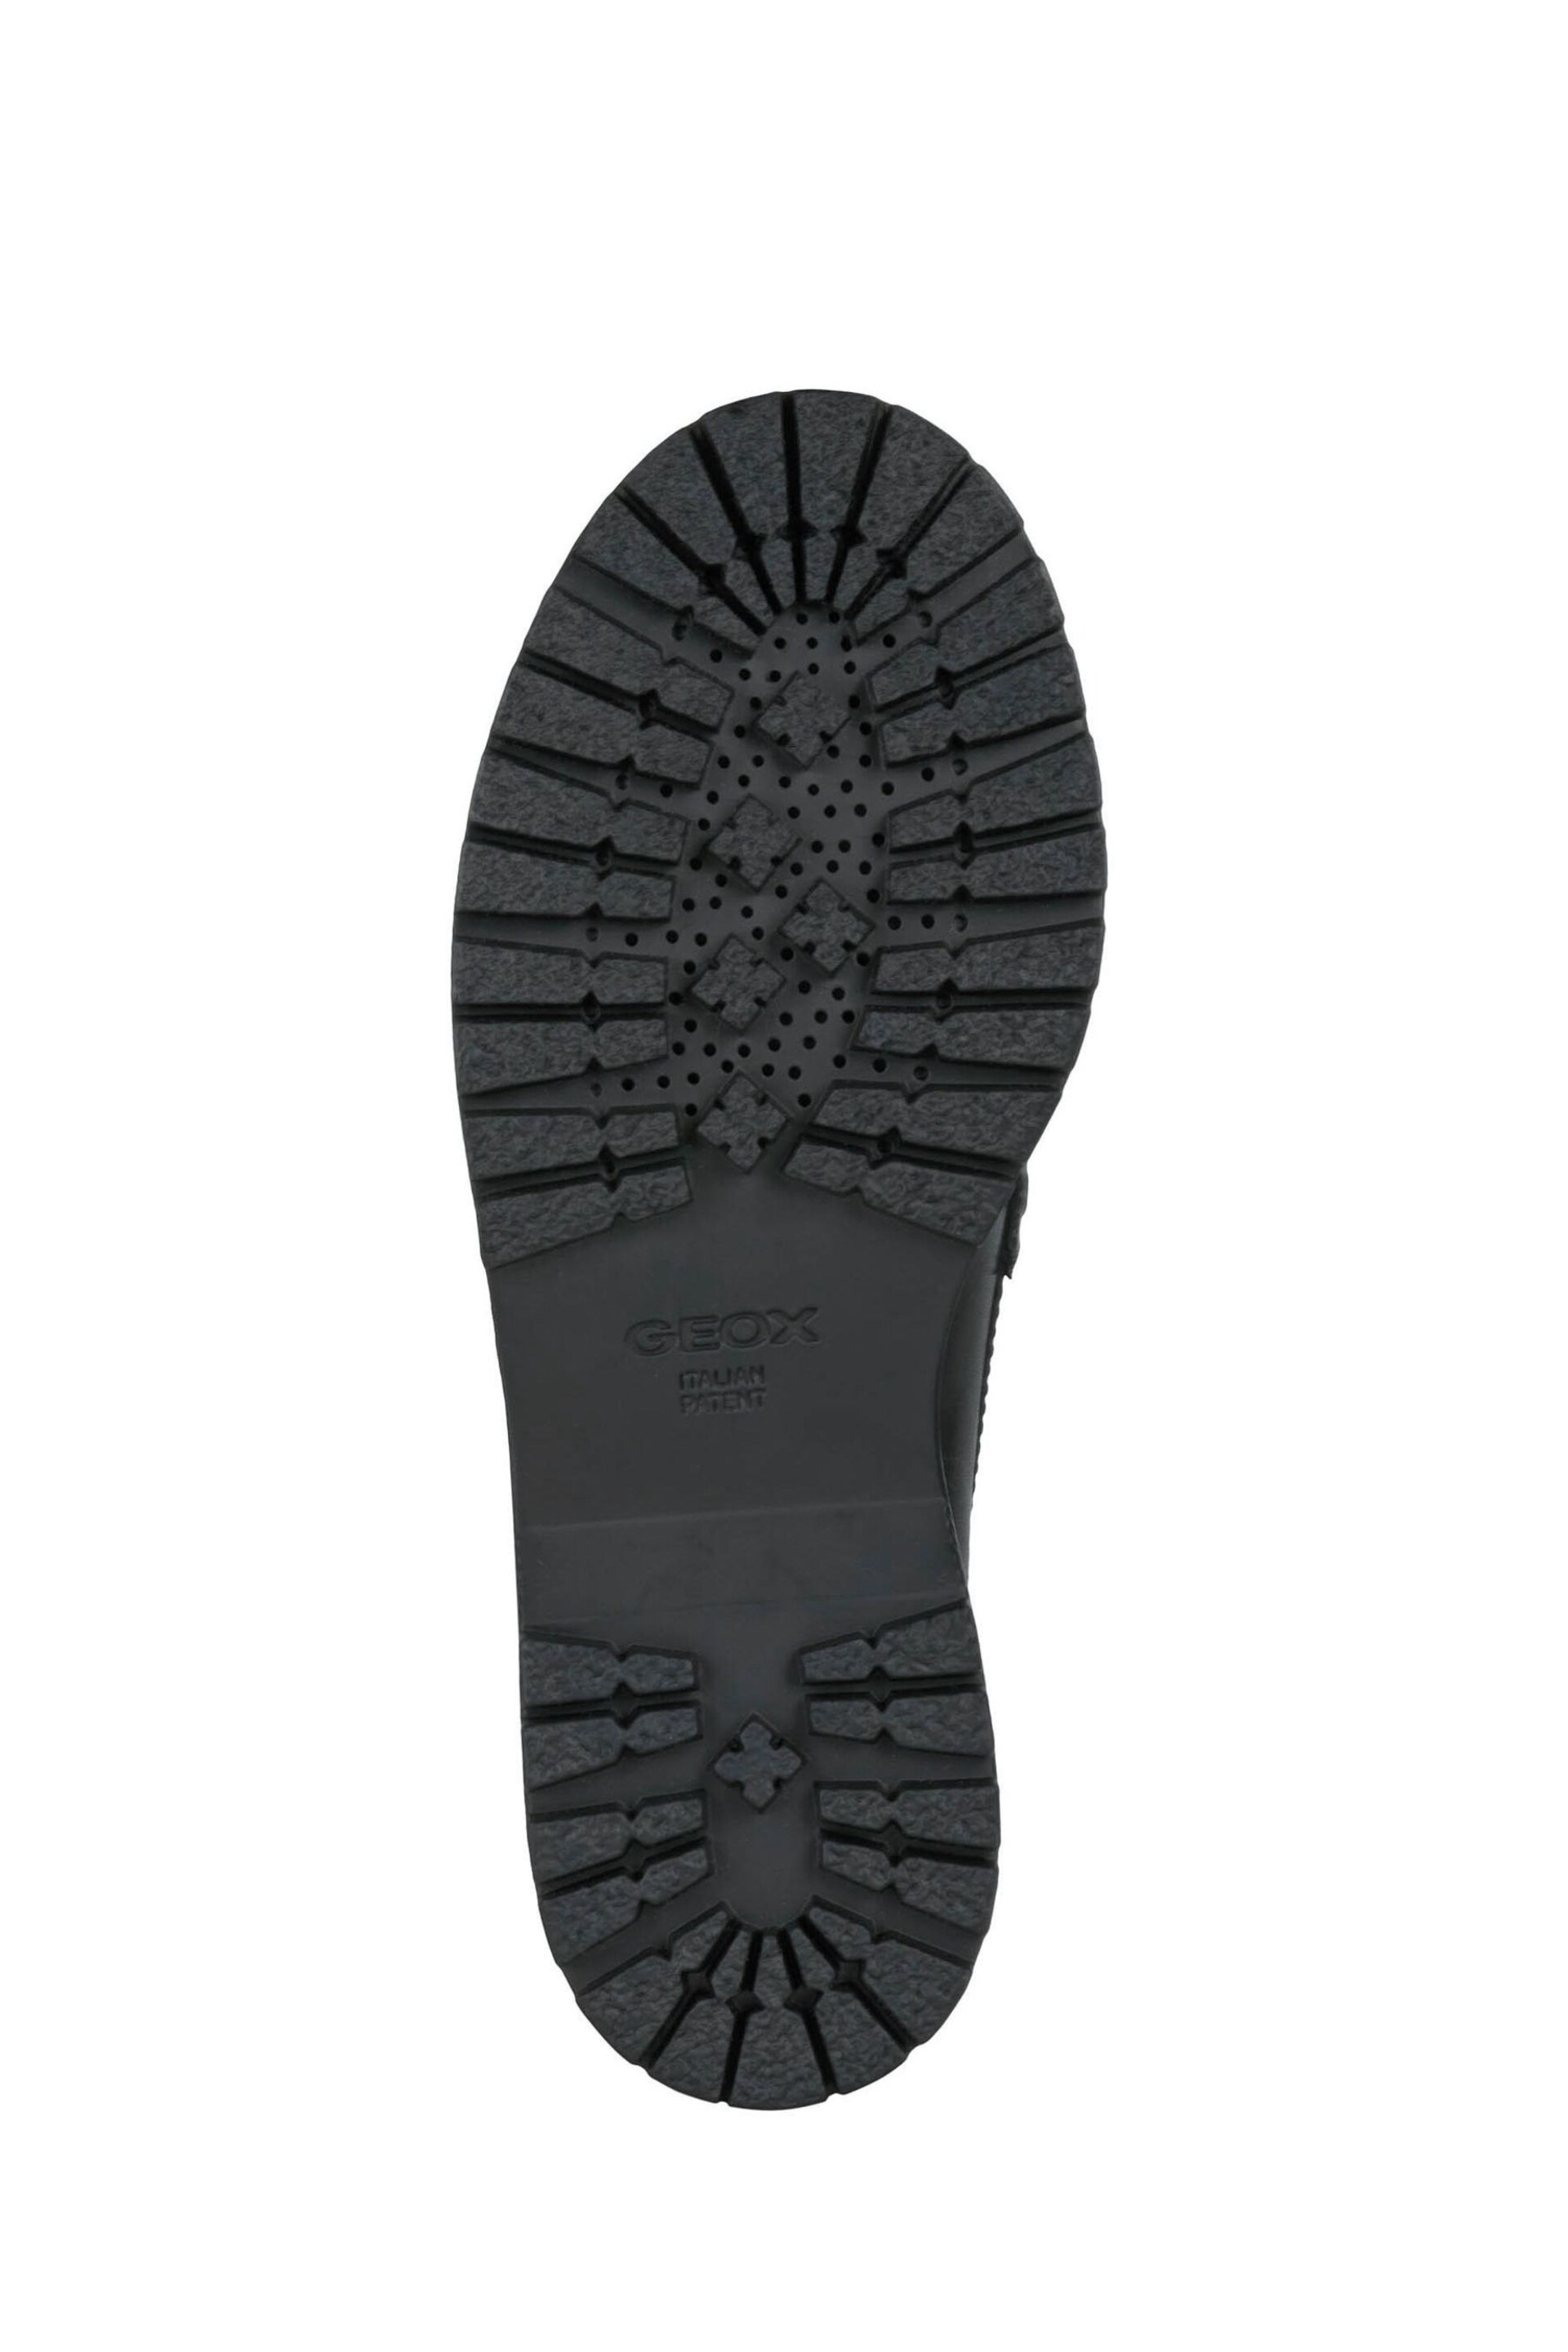 Geox Womens Bleyze Black Shoes - Image 6 of 6